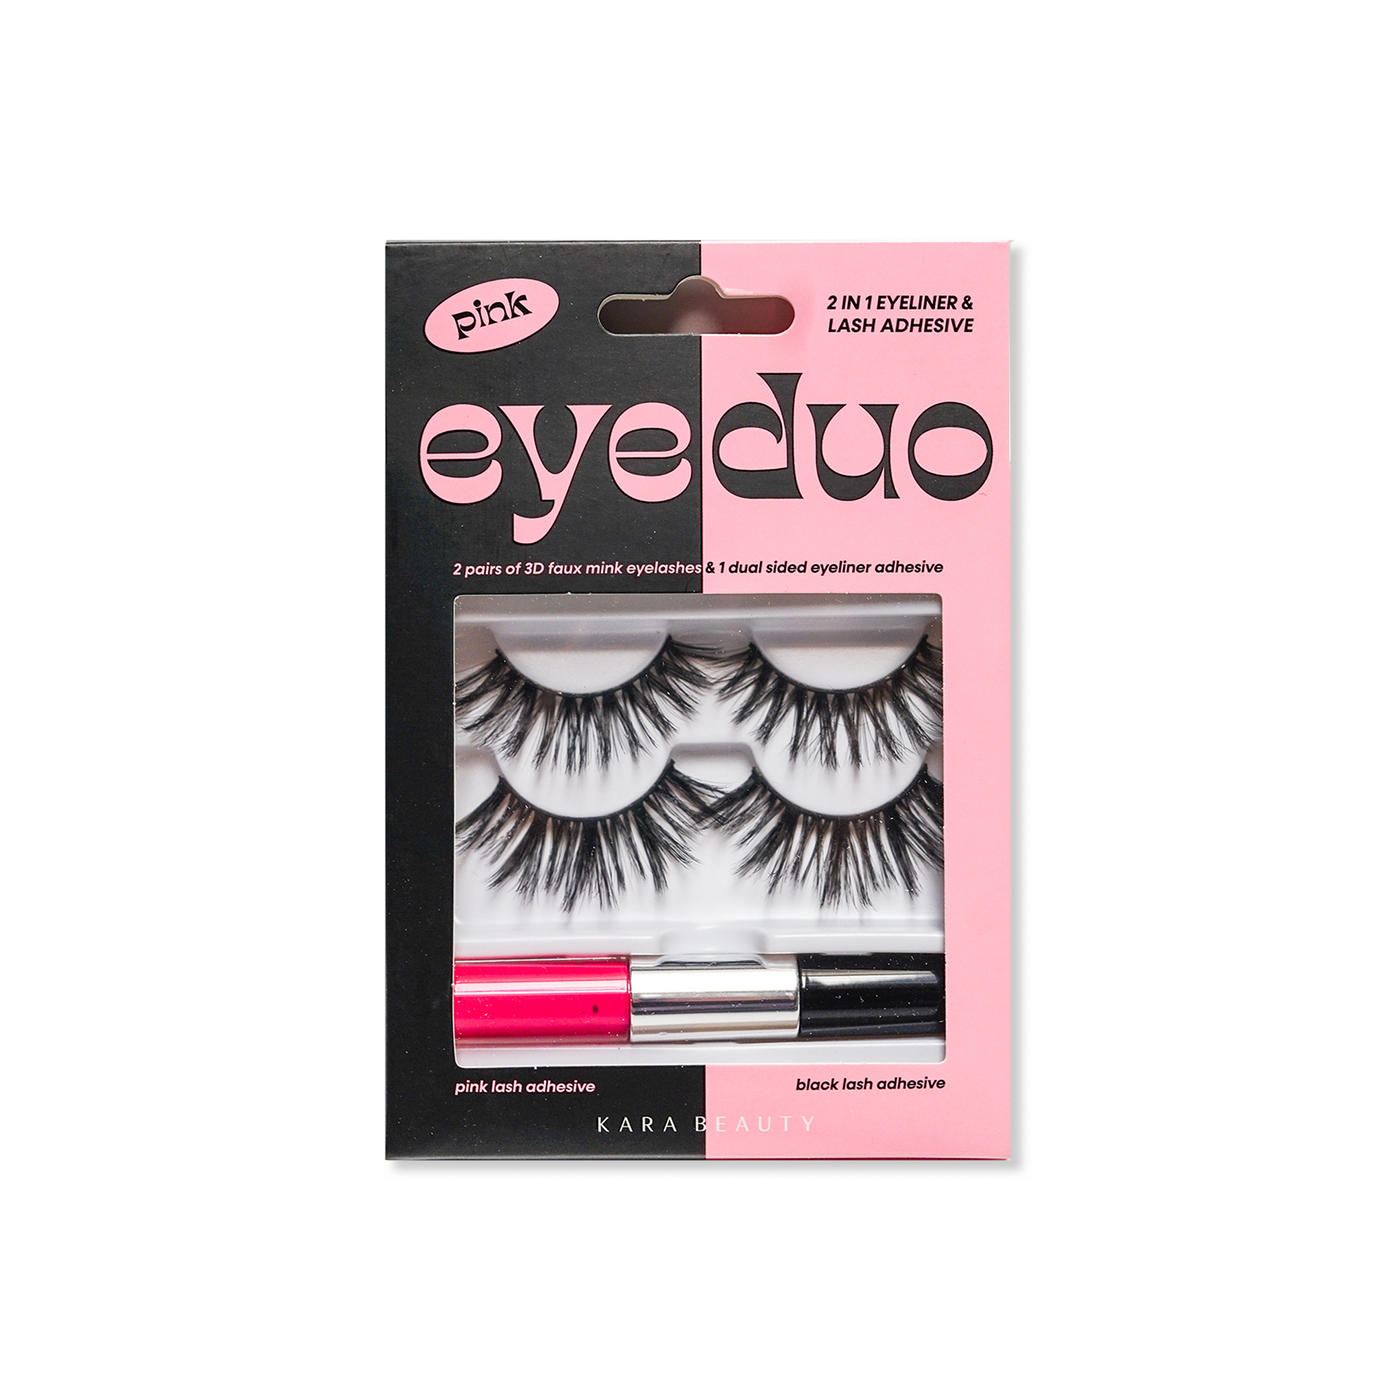 Kara Beauty's Eye Duo 2 Assorted Lashes and 2-in-1 Pink and Black Liner and lash adhesive